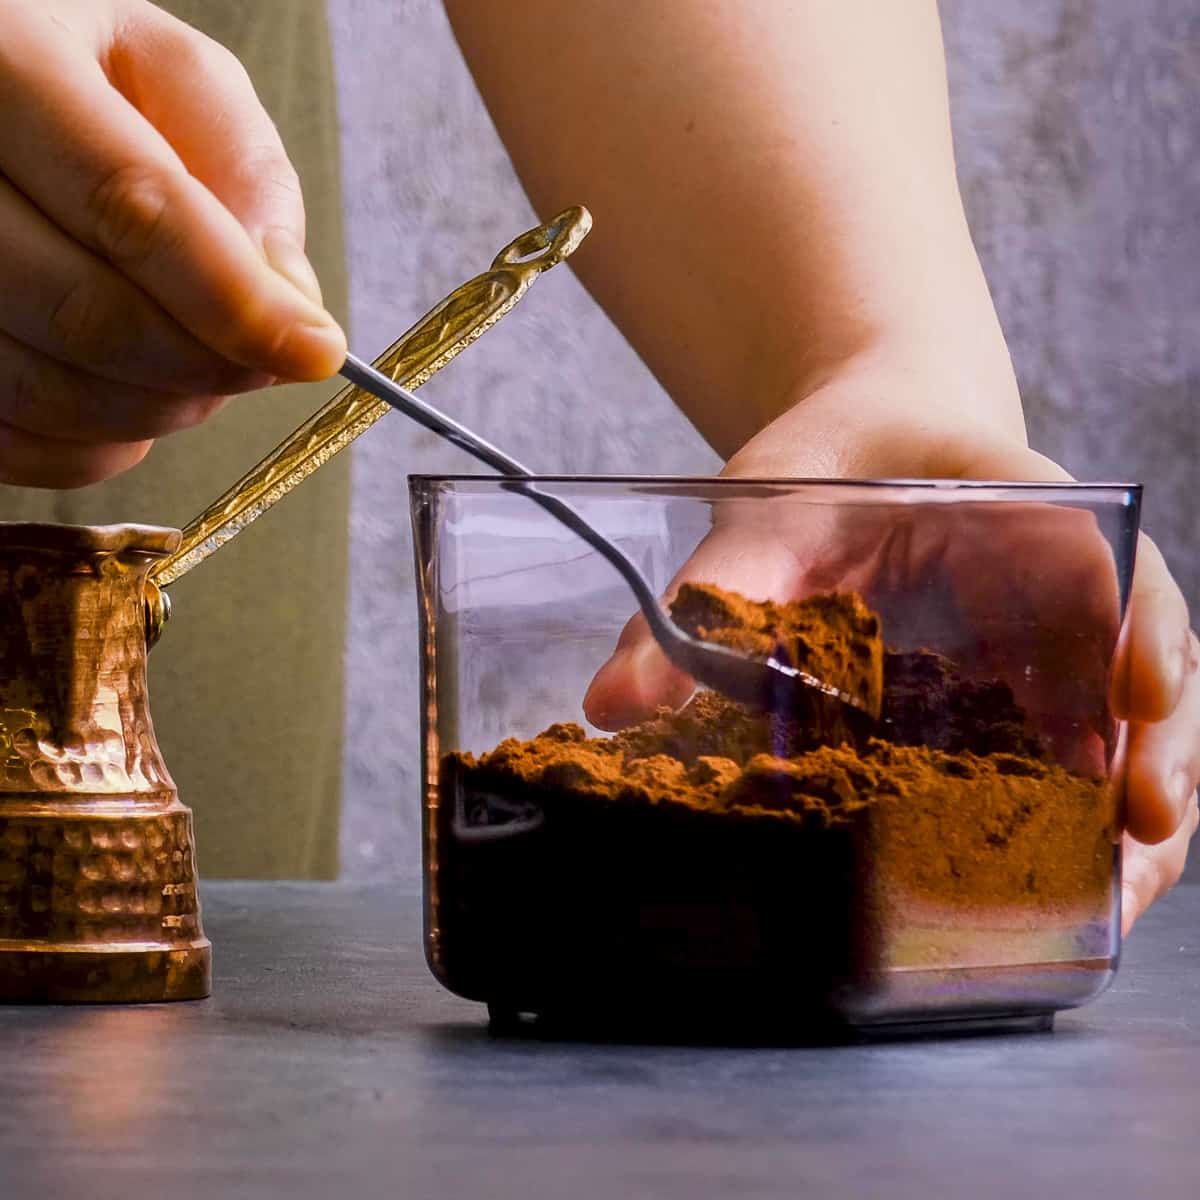 Woman getting a spoonful of ground Turkish coffee from a jar.